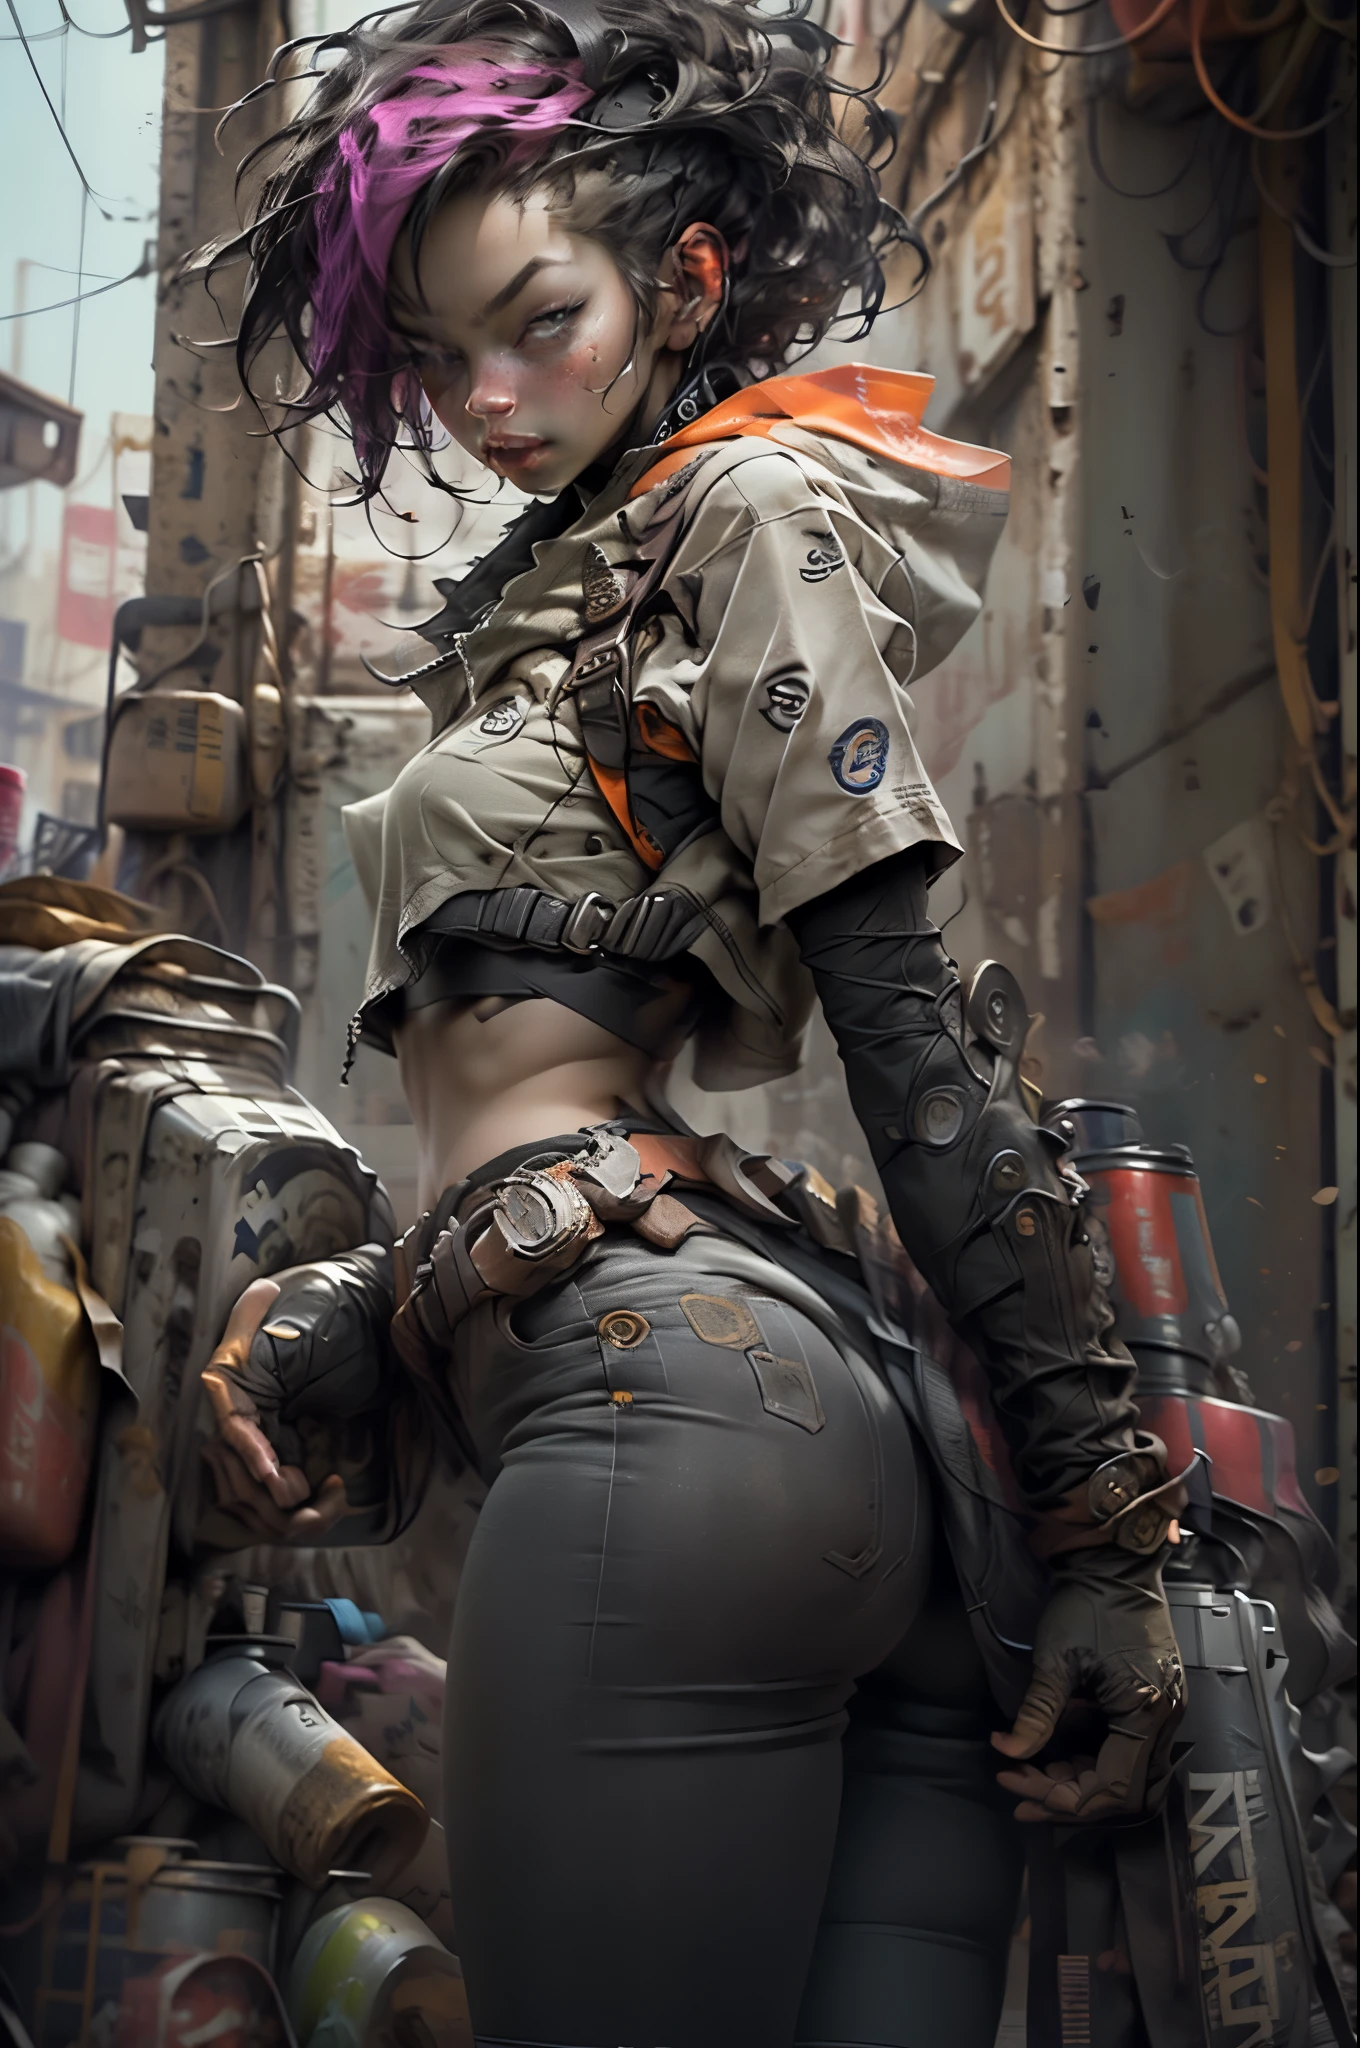 unreal engine:1.4,CG K ultra realistic, photorealistic:1.4, skin texture:1.4, artwork 1girl, Gatling gun, Shell, looking at viewer, dynamic pose, Blows, ammunition belt, gloves, breasts, shooting, extremely detailed :1.4, more detailed, optical mix, playful patterns, animated texture, unique visual effect, or cyberpunk yellow color, red pantyhose, yellow leather miniskirt, masterpiece, ((colors, cyan, greens, pink, brown: 1.2)) , 8k realistic digital art)), 32k